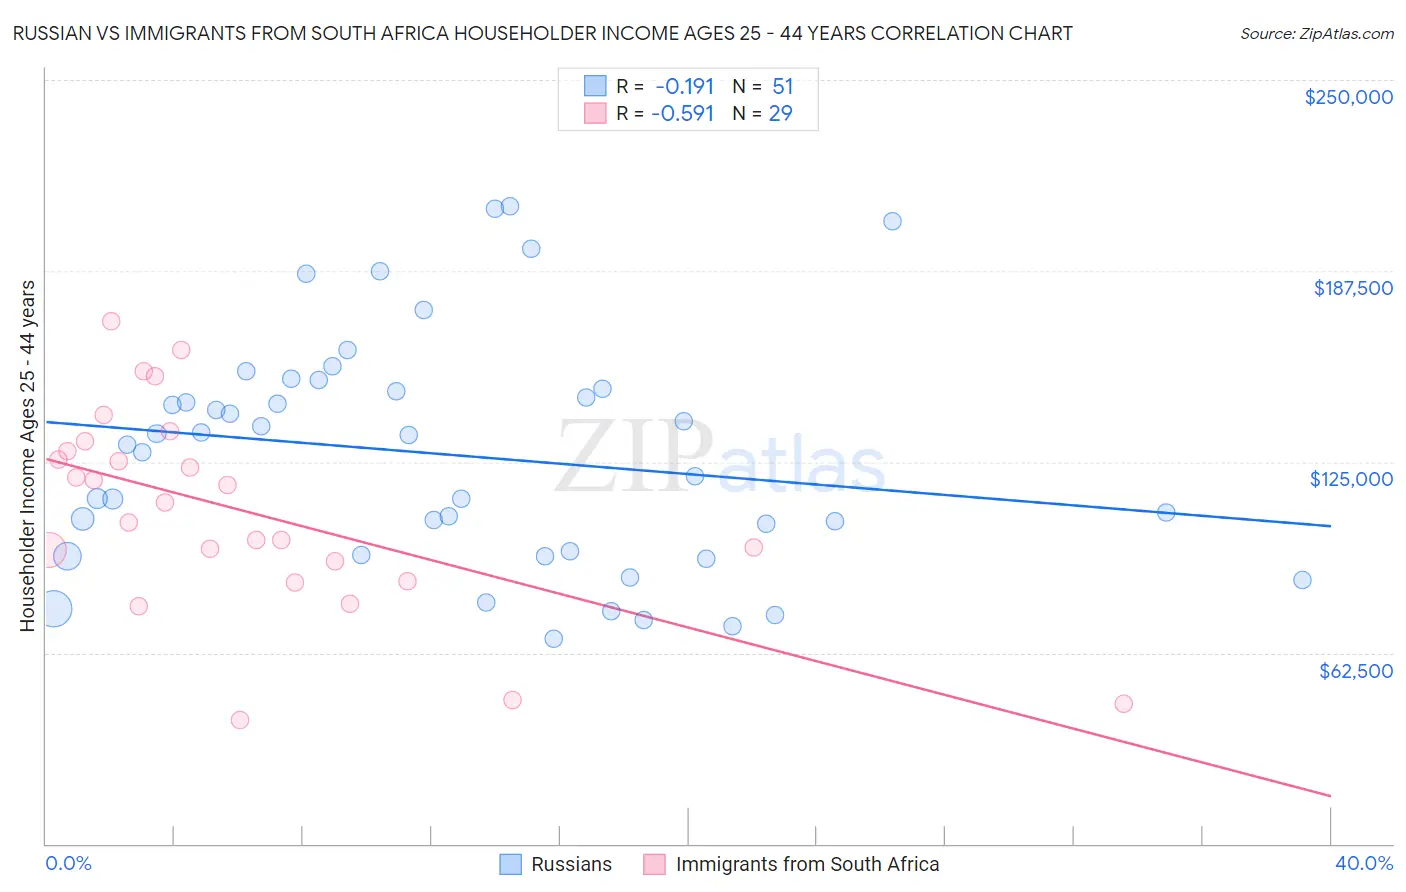 Russian vs Immigrants from South Africa Householder Income Ages 25 - 44 years